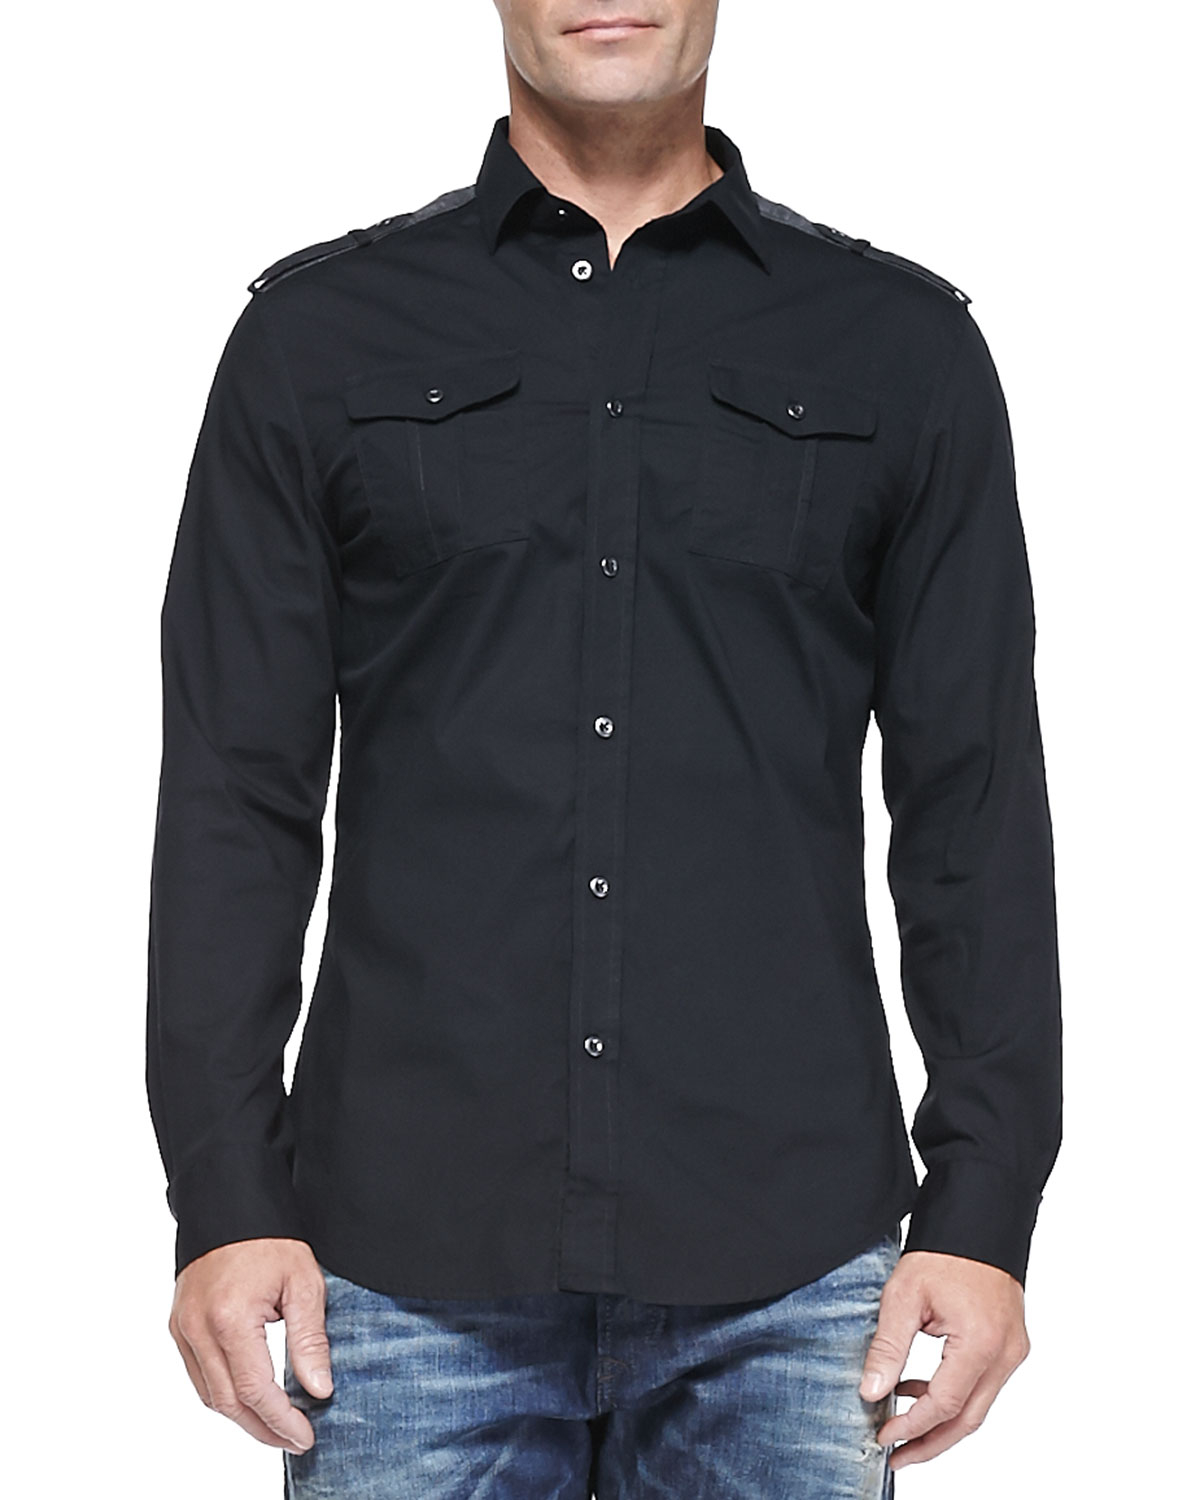 DIESEL Button-Down Shirt With Pockets in Black for Men - Lyst